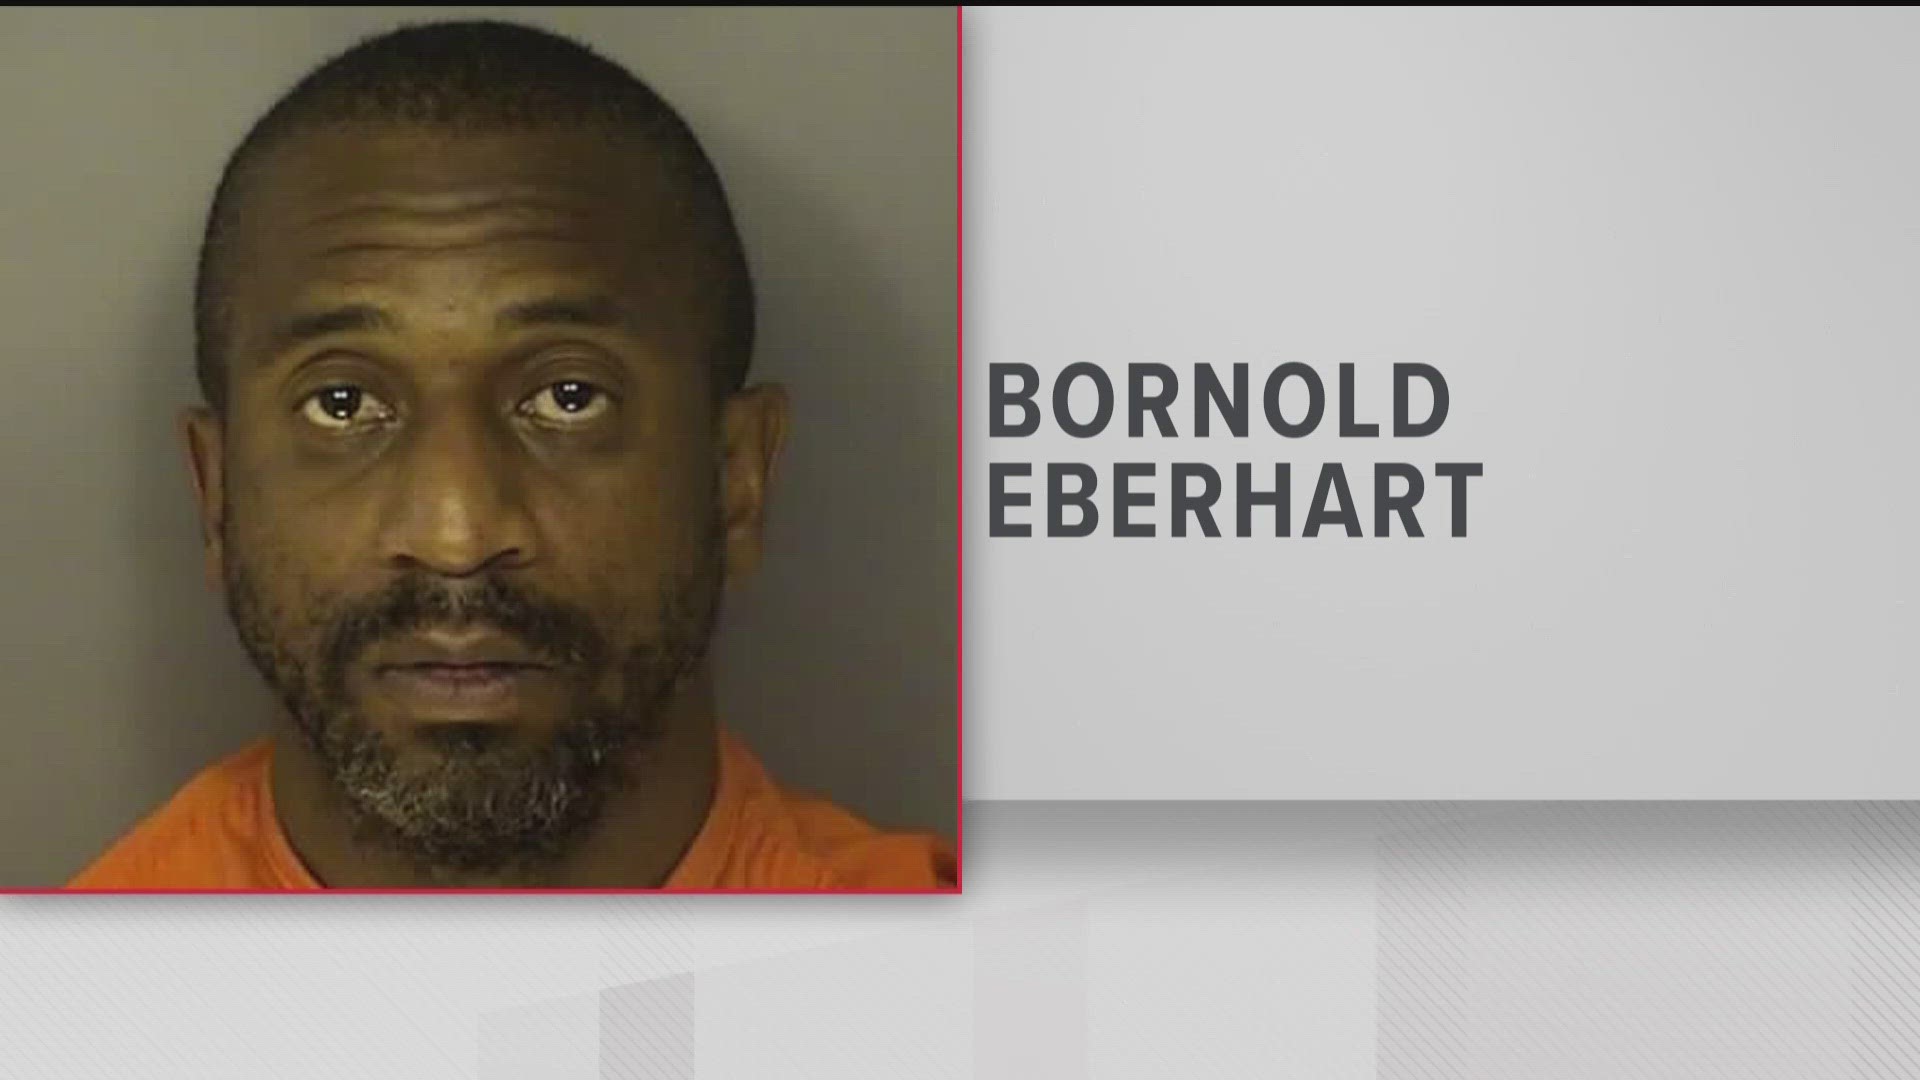 North Myrtle Beach Police charged Bornold Eberhart, of Decatur, with murder in the homicide of Kirstin Laymon. She was reported missing in 2023 in Duluth.